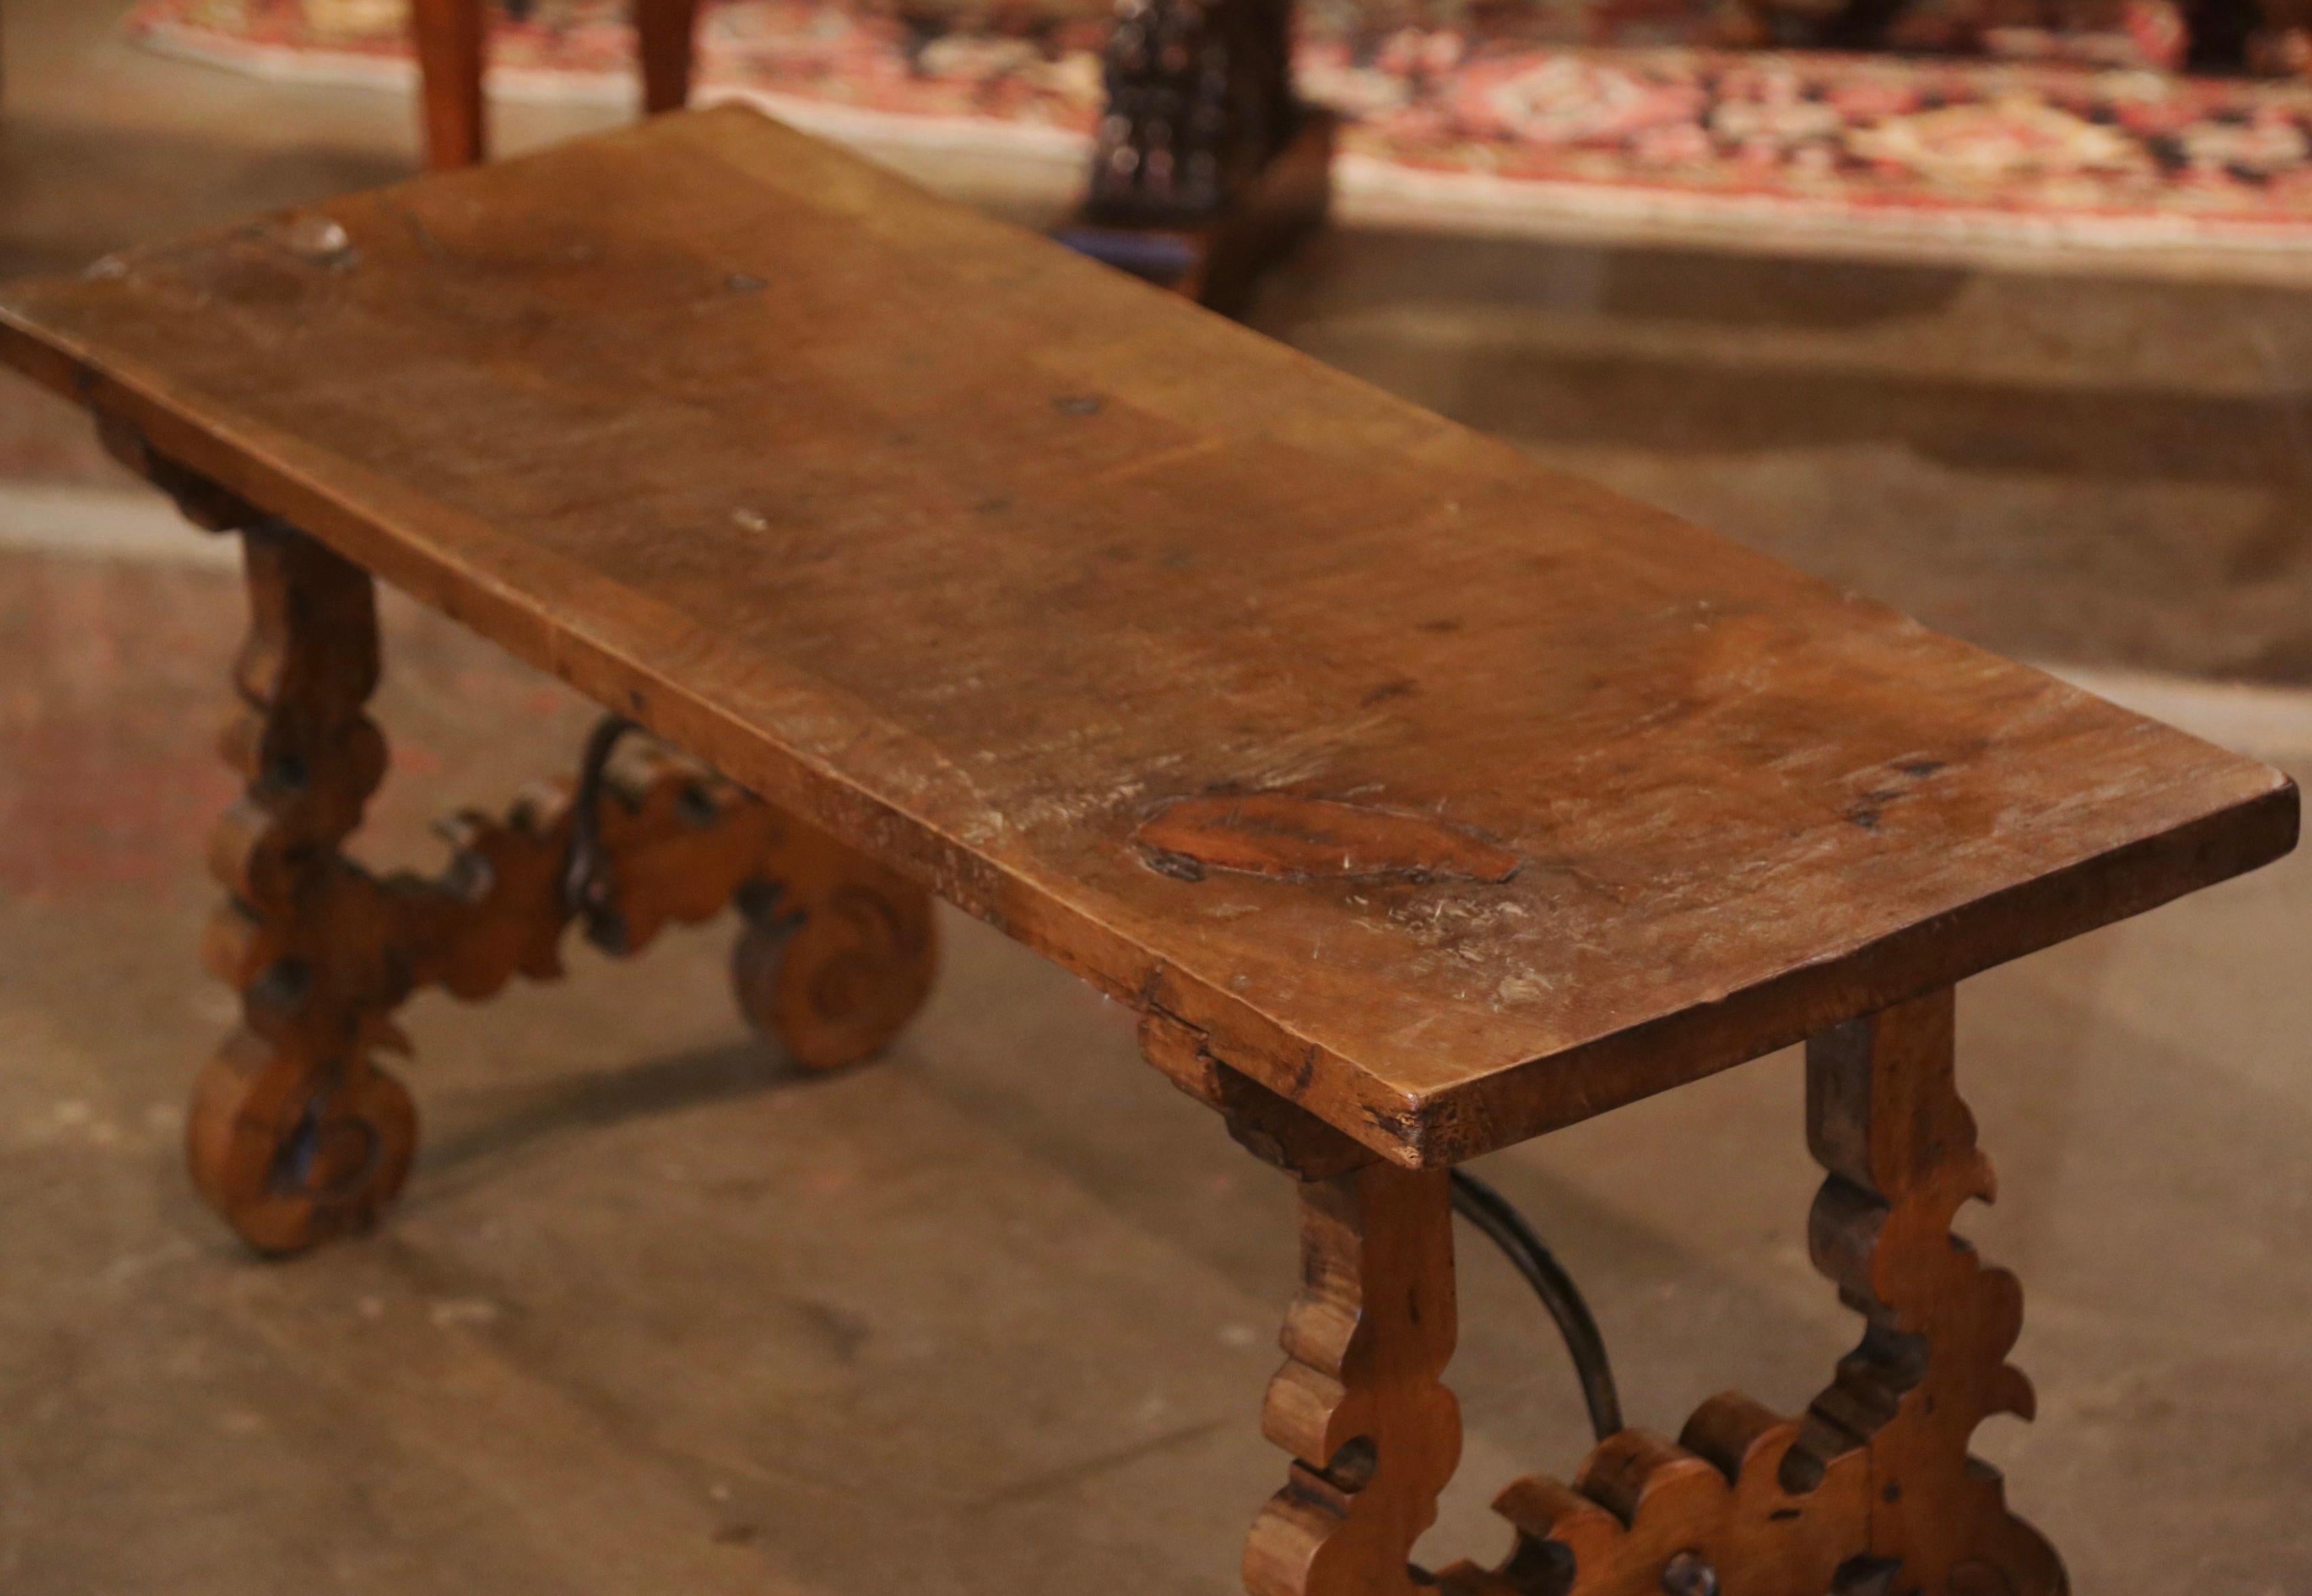 Hand-Carved 18th Century, Spanish Carved Walnut Coffee Table with Iron Stretcher